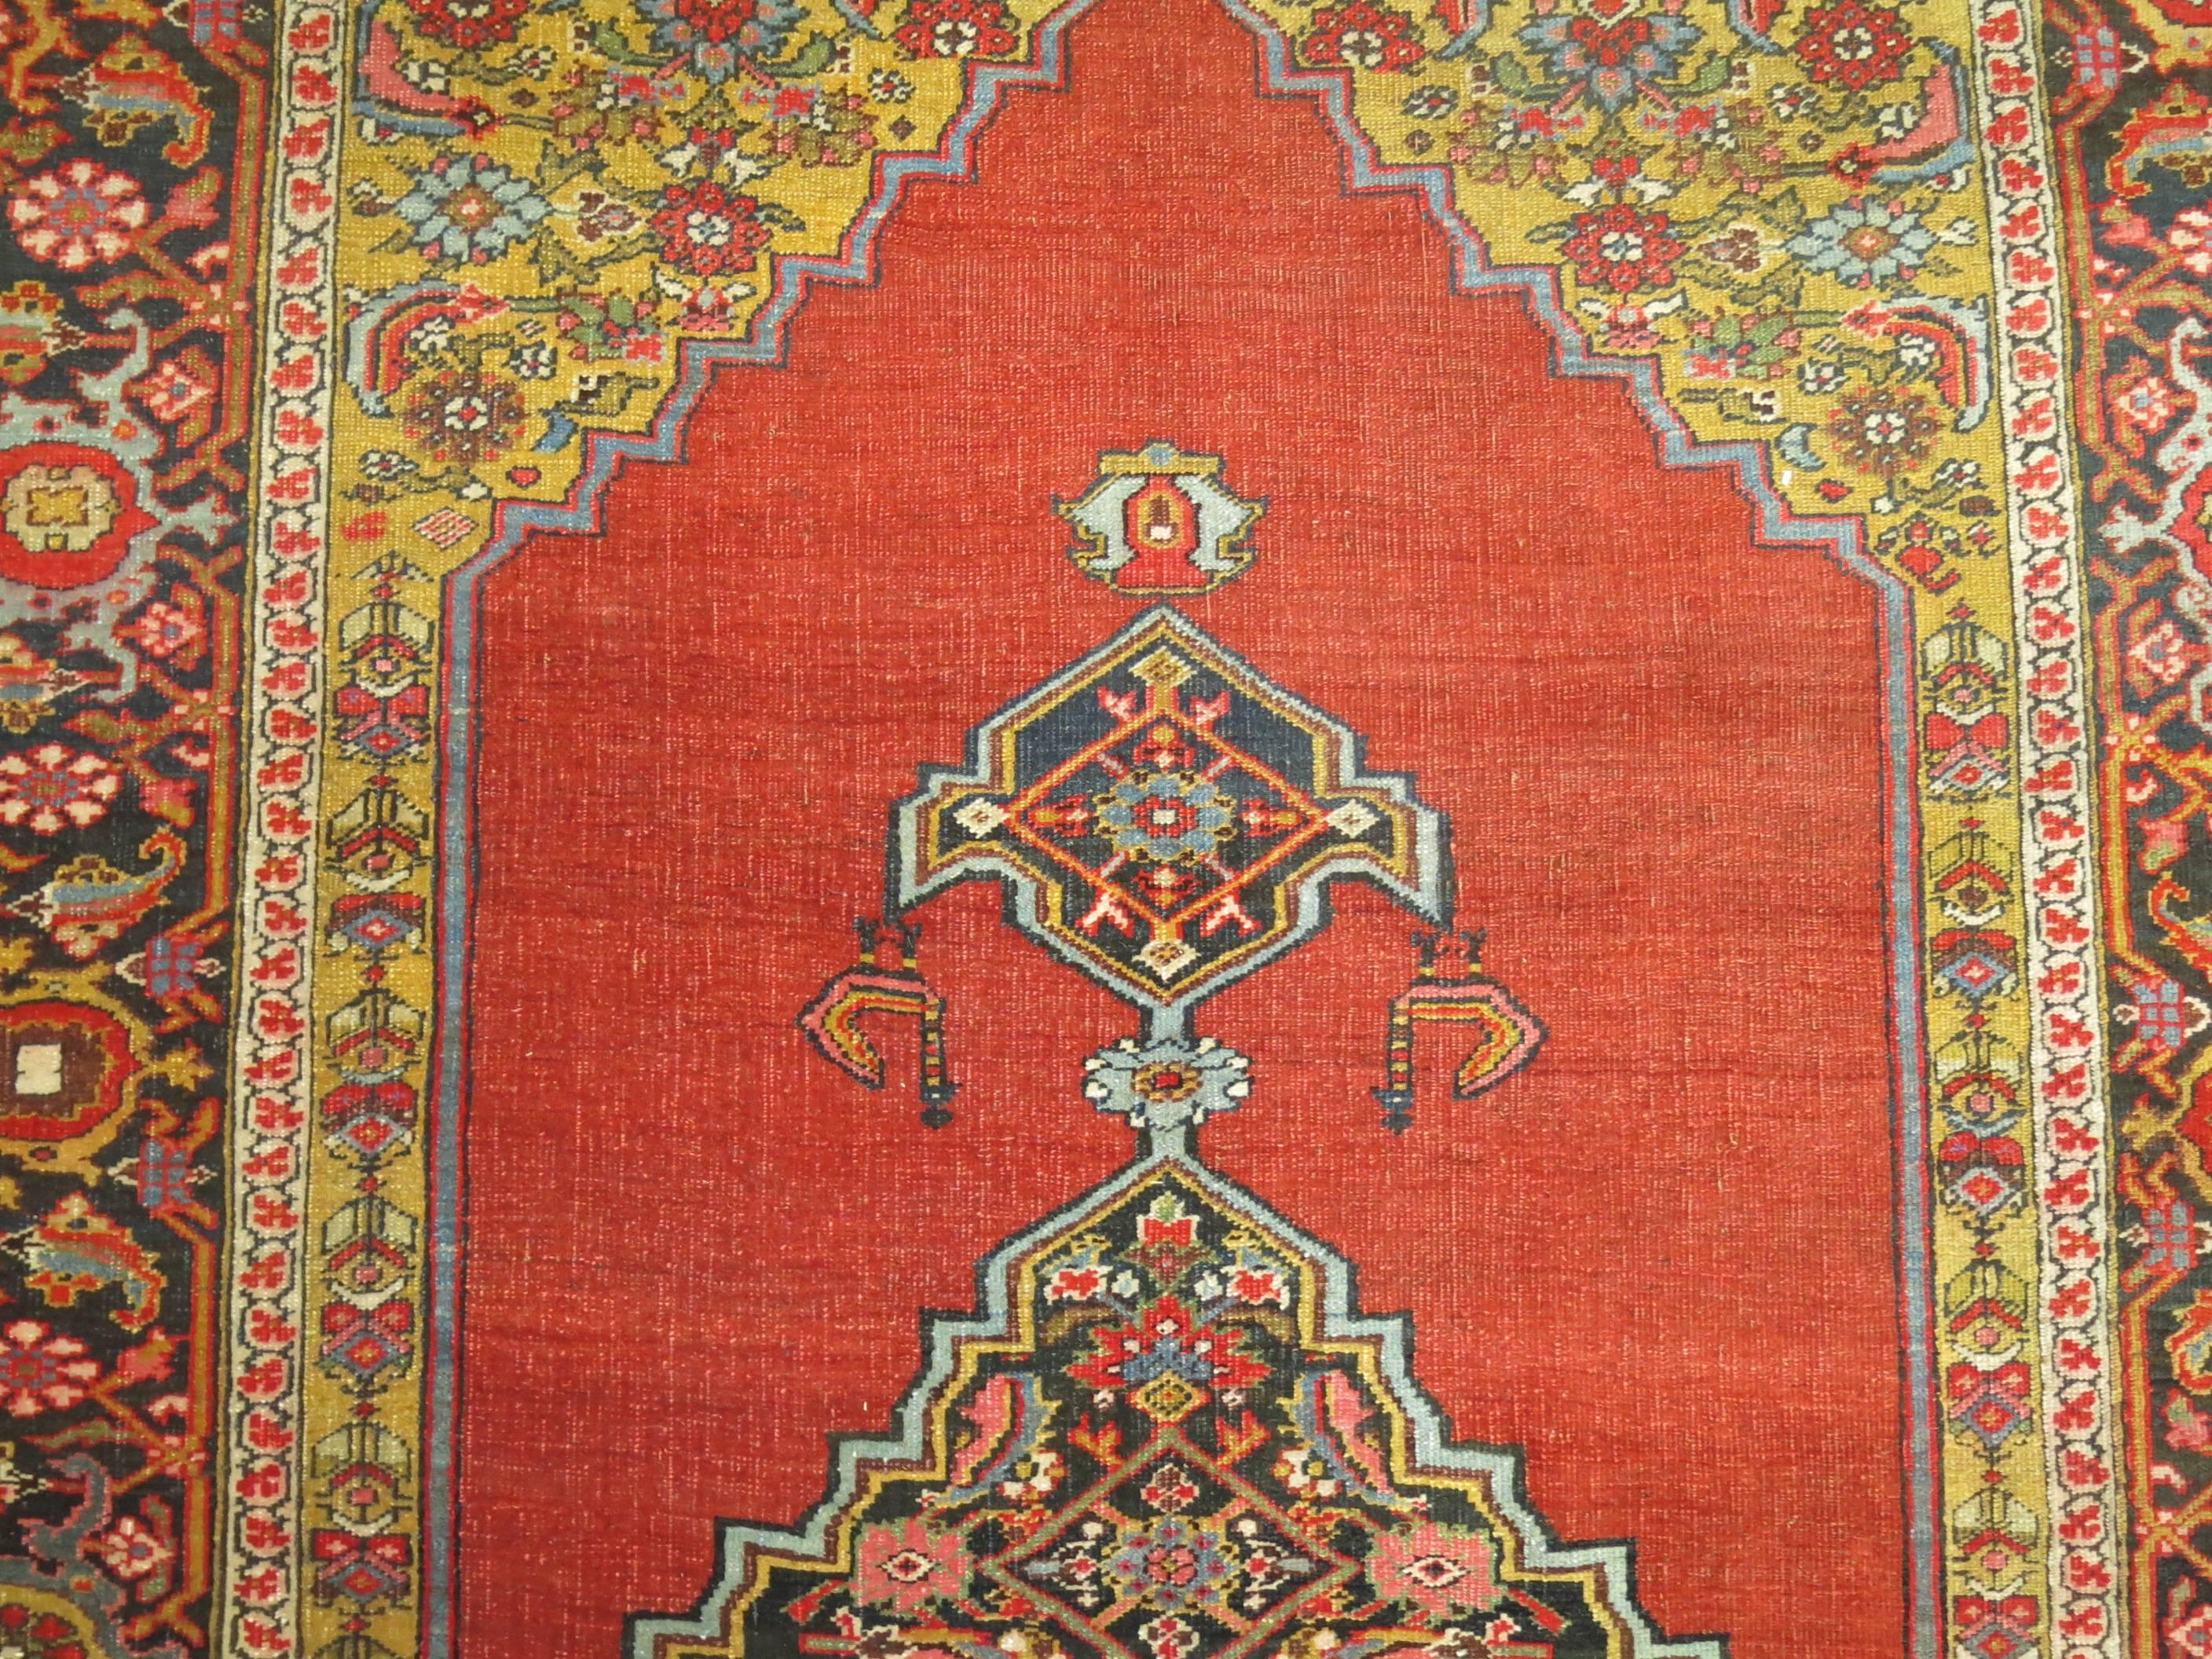 Jewel toned antique Persian Bidjar gallery size rug.

Bidjar carpets are world renowned for their superb artistry, craftsmanship, and excellent material, and can be distinguished by their heavy wool foundation. As the weaver tied each row of